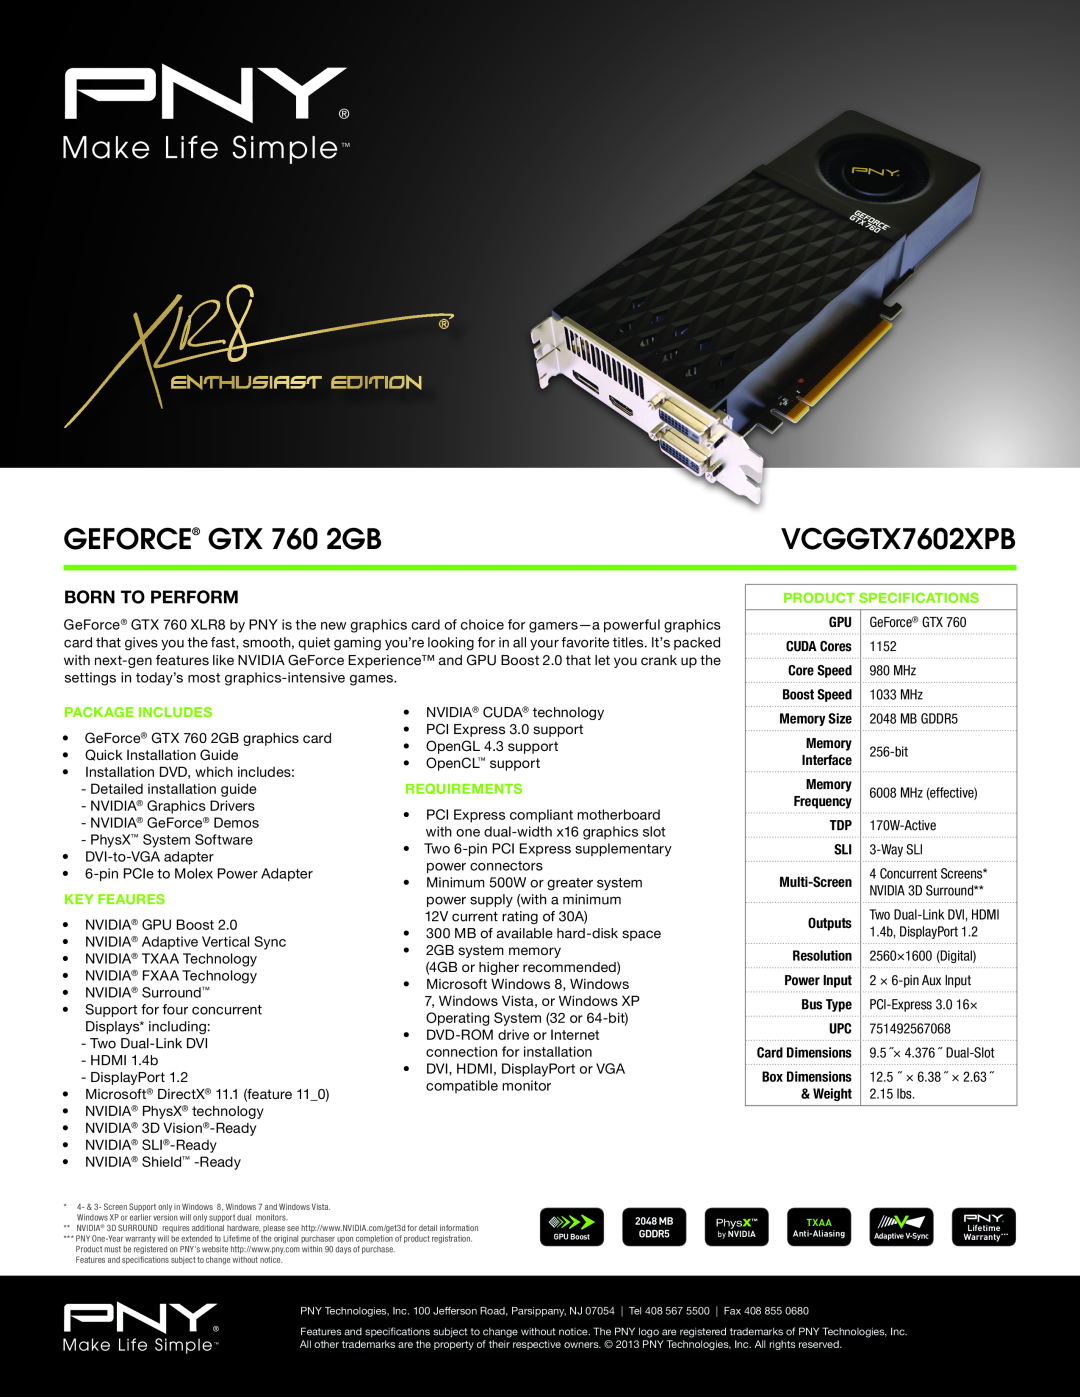 PNY VCGGTX7602XPB specifications GEFORCE GTX 760 2GB, Born To Perform, Product Specifications, Package Includes 